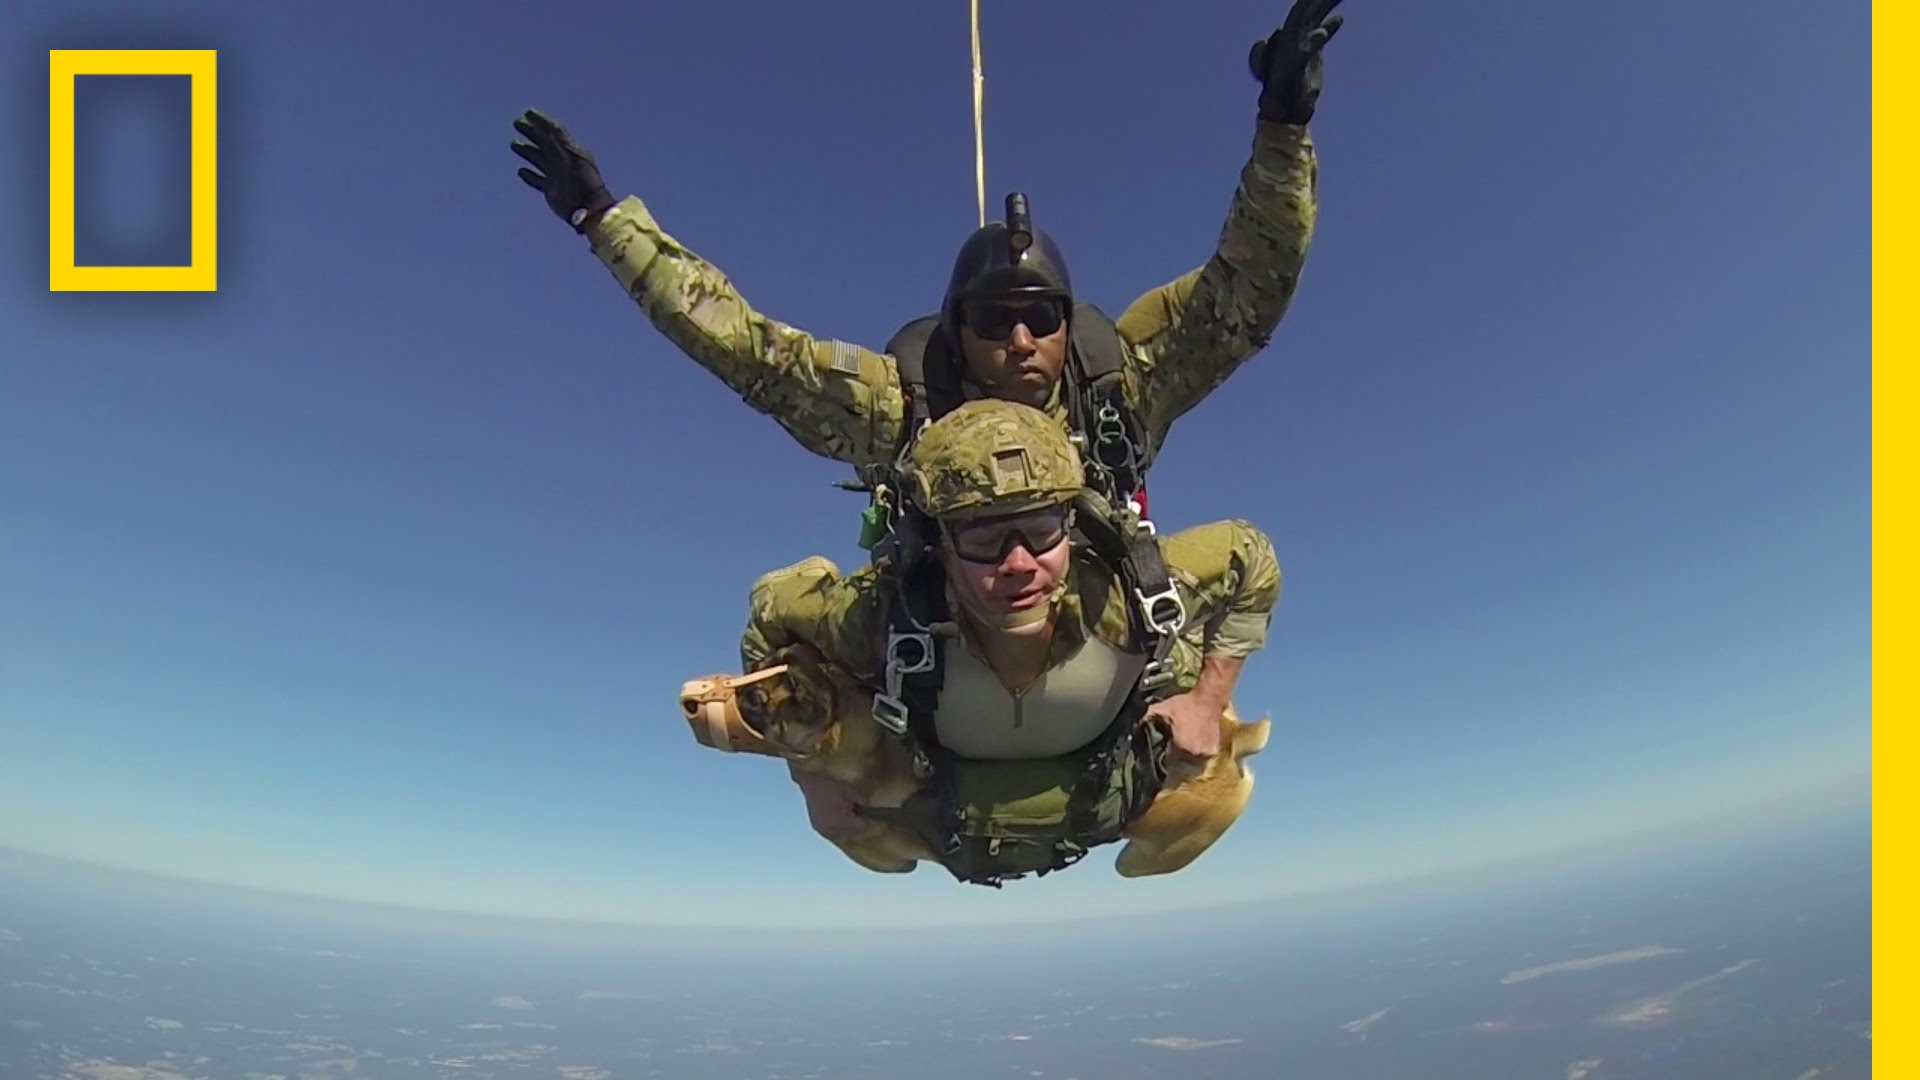 Hero War Dog Skydives with Soldier | National Geographic - YouTube